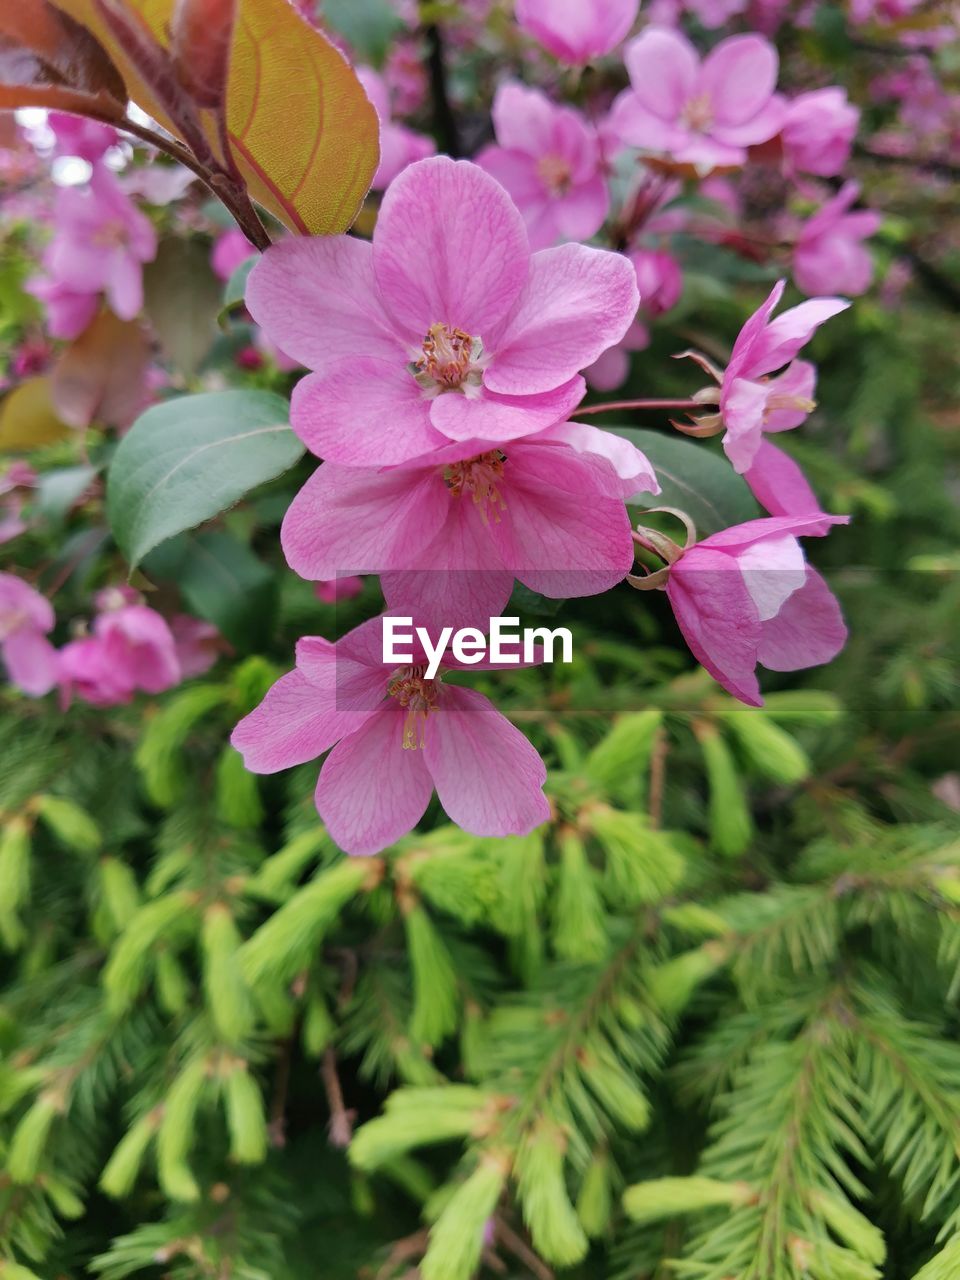 plant, flower, flowering plant, beauty in nature, pink, freshness, close-up, growth, fragility, petal, nature, flower head, inflorescence, plant part, leaf, no people, focus on foreground, tree, springtime, botany, outdoors, day, blossom, green, wildflower